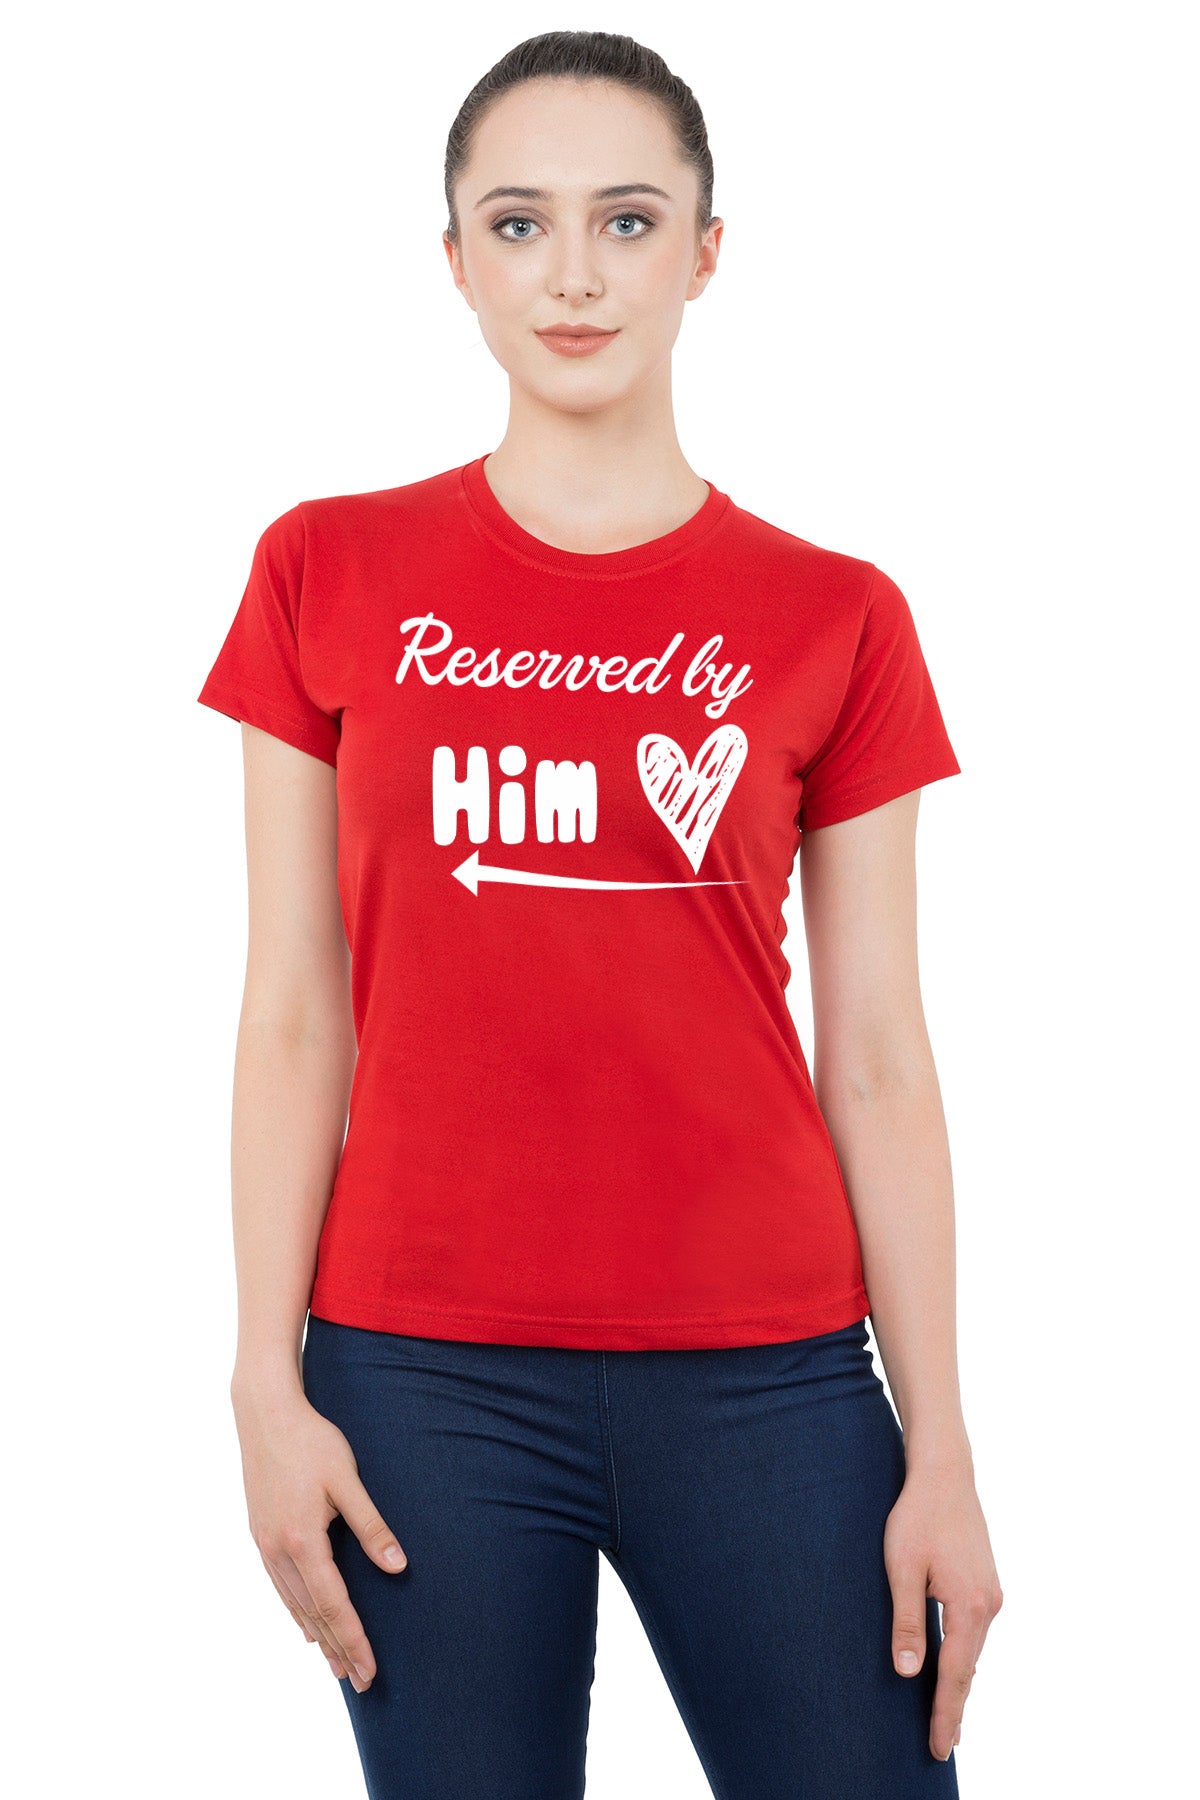 Taken by her Reserved by him matching Couple T shirts- Red